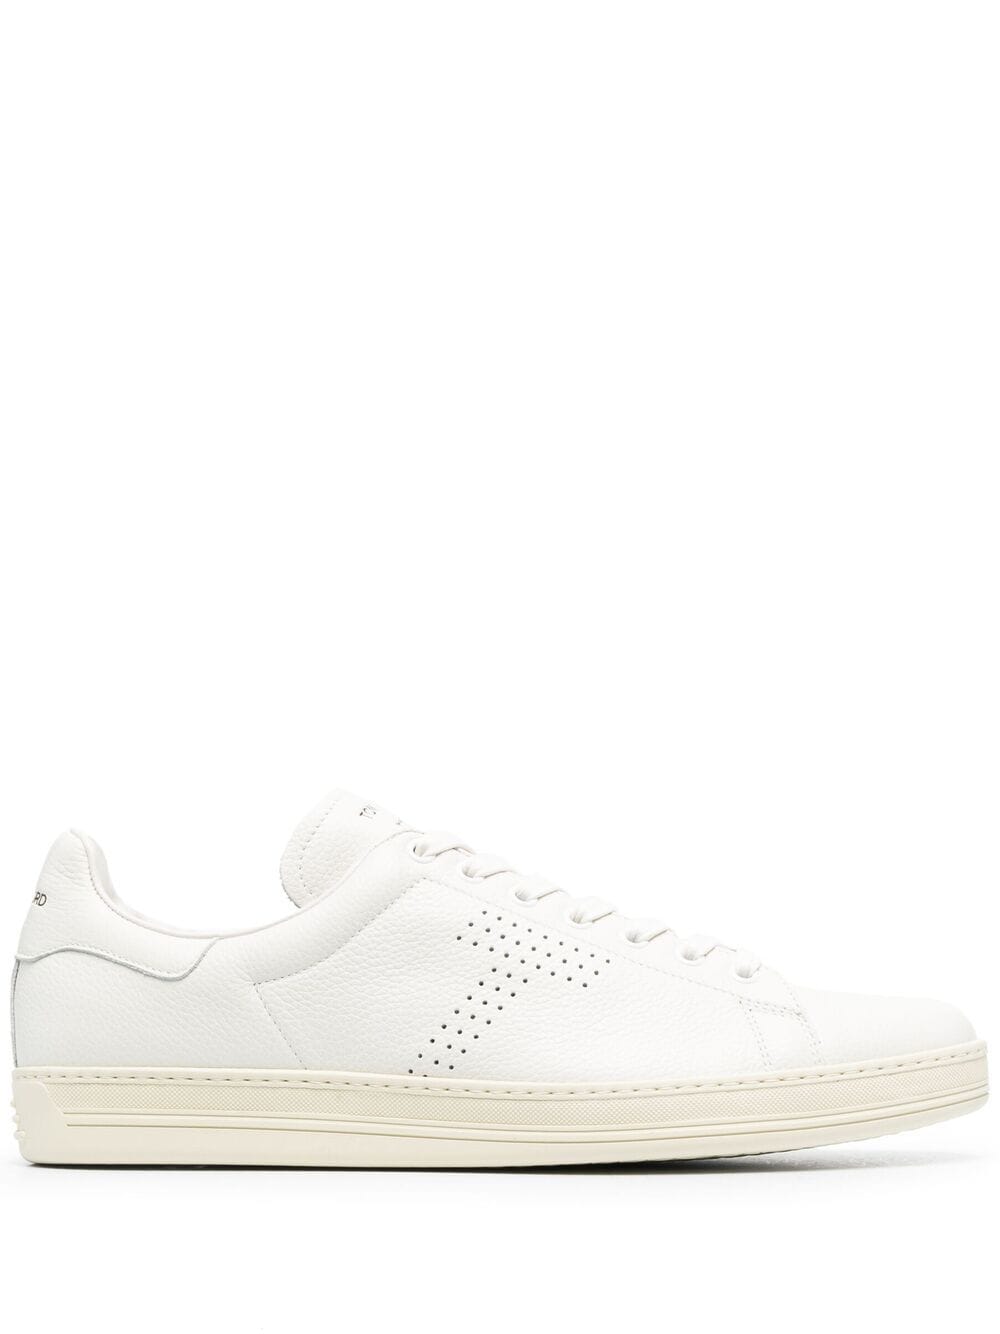 TOM FORD Warwick Grained Leather Sneakers White - MAISONDEFASHION.COM